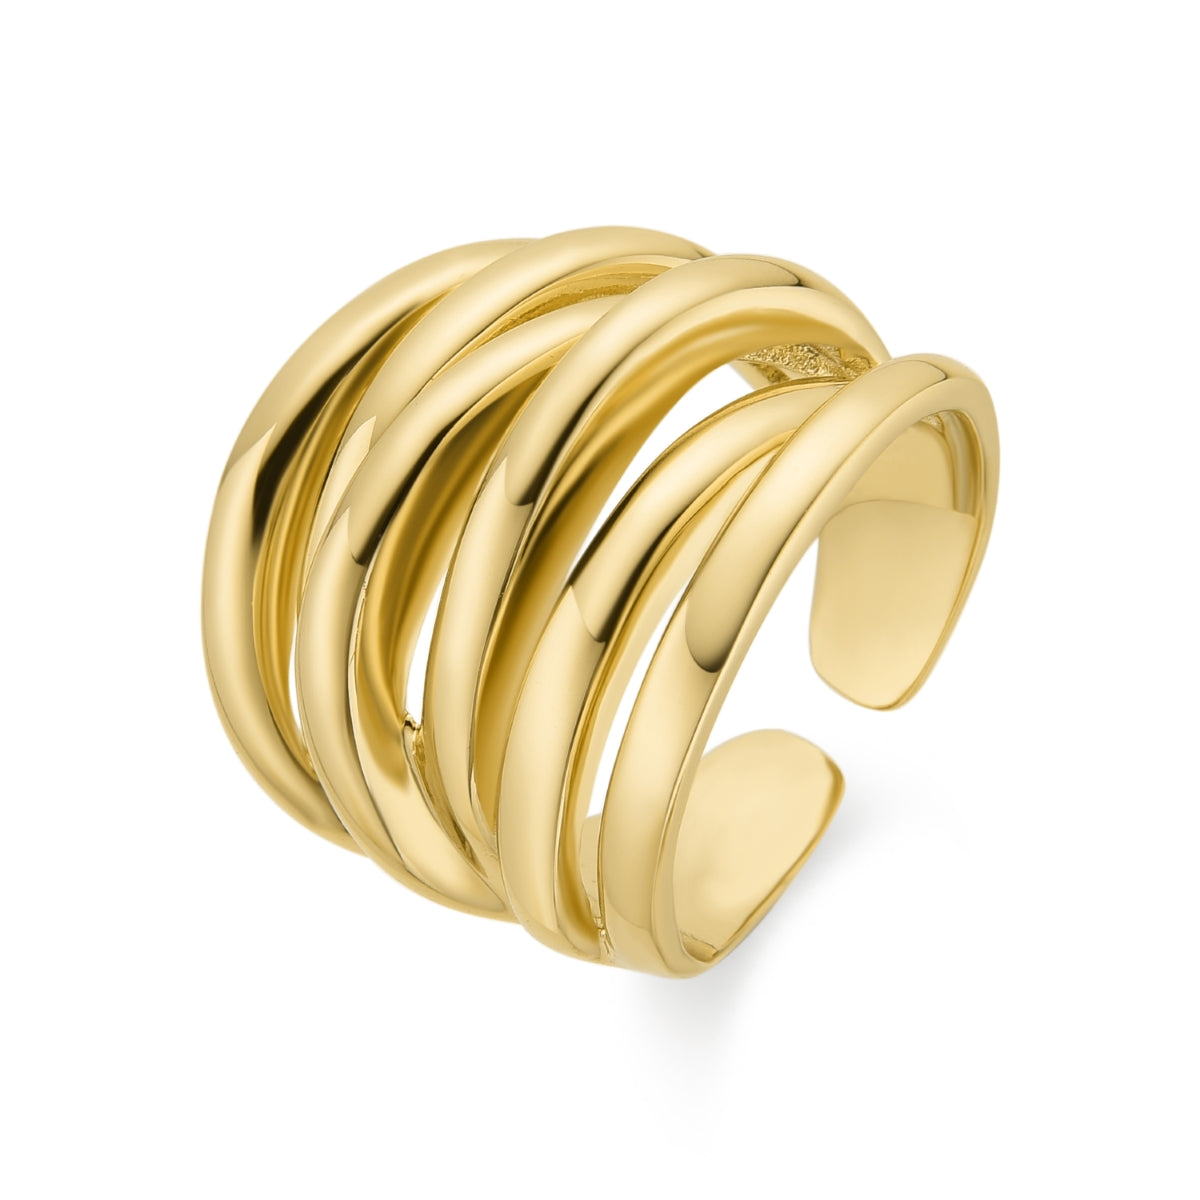 Vermixi ring finished in 18 kt yellow gold